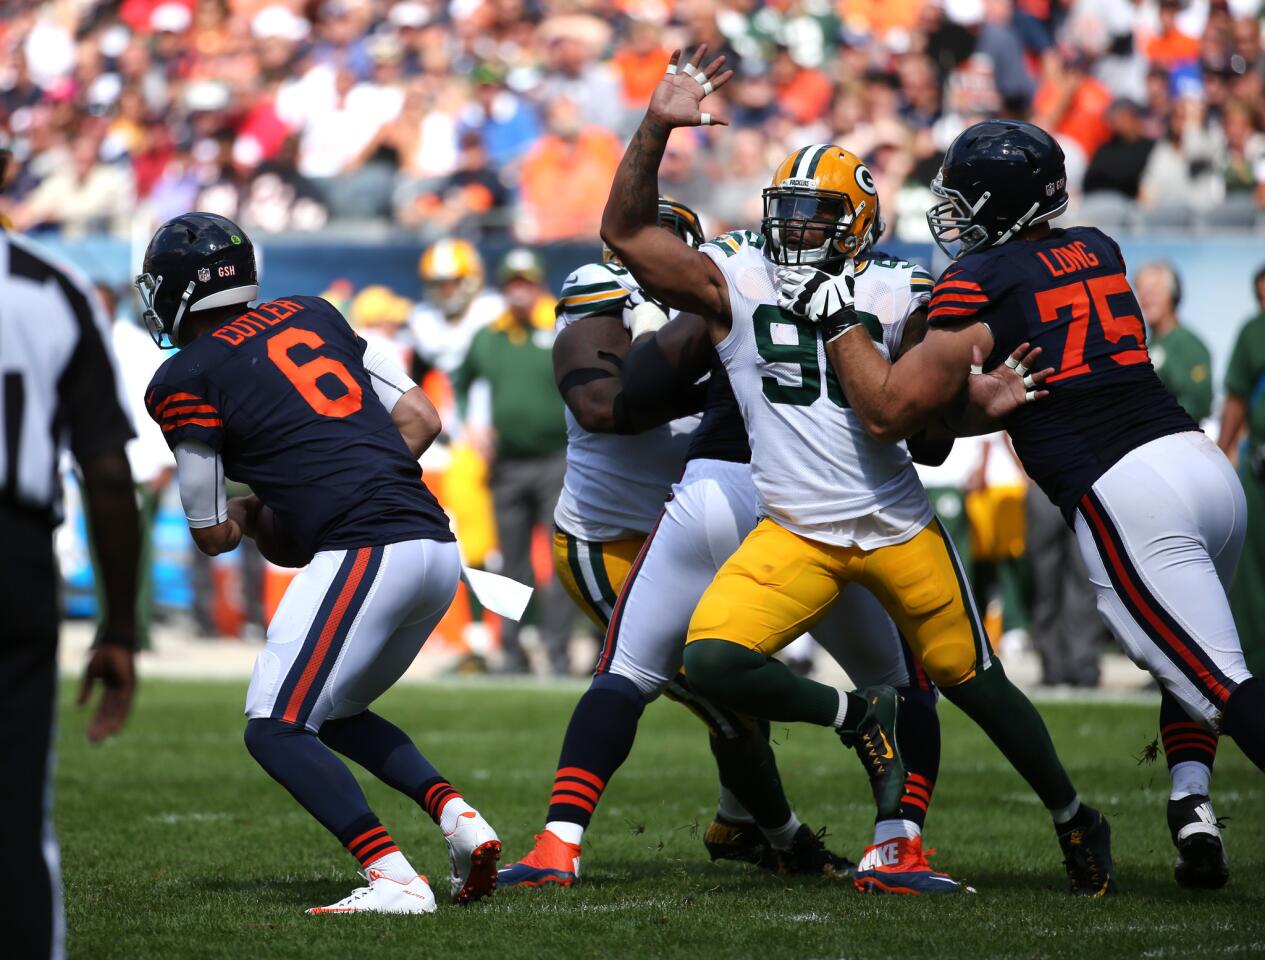 Chicago Bears guard Kyle Long (75) blocks Green Bay Packers linebacker Mike Neal (96) in the second half of a game at Soldier Field in Chicago on Sept. 13, 2015.